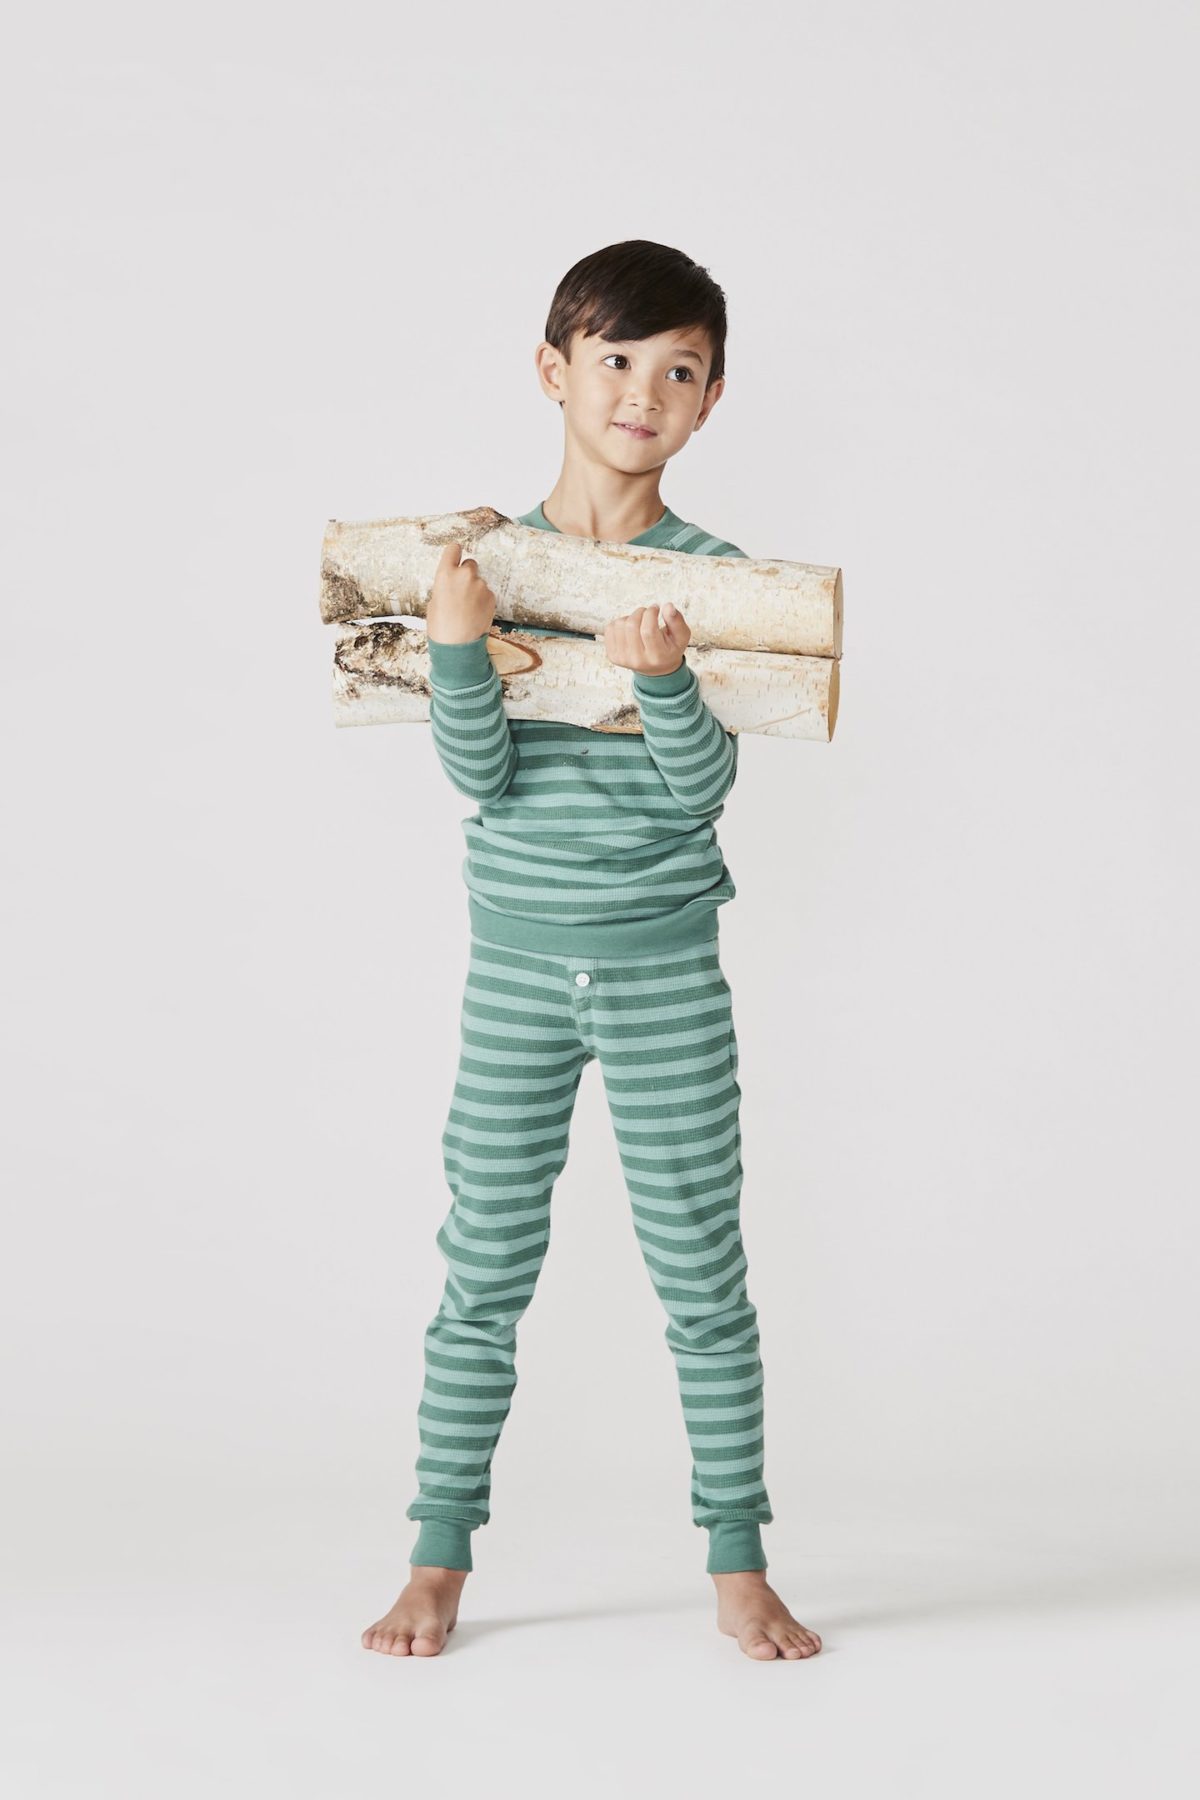 A picture of a boy in stripped green pajamas